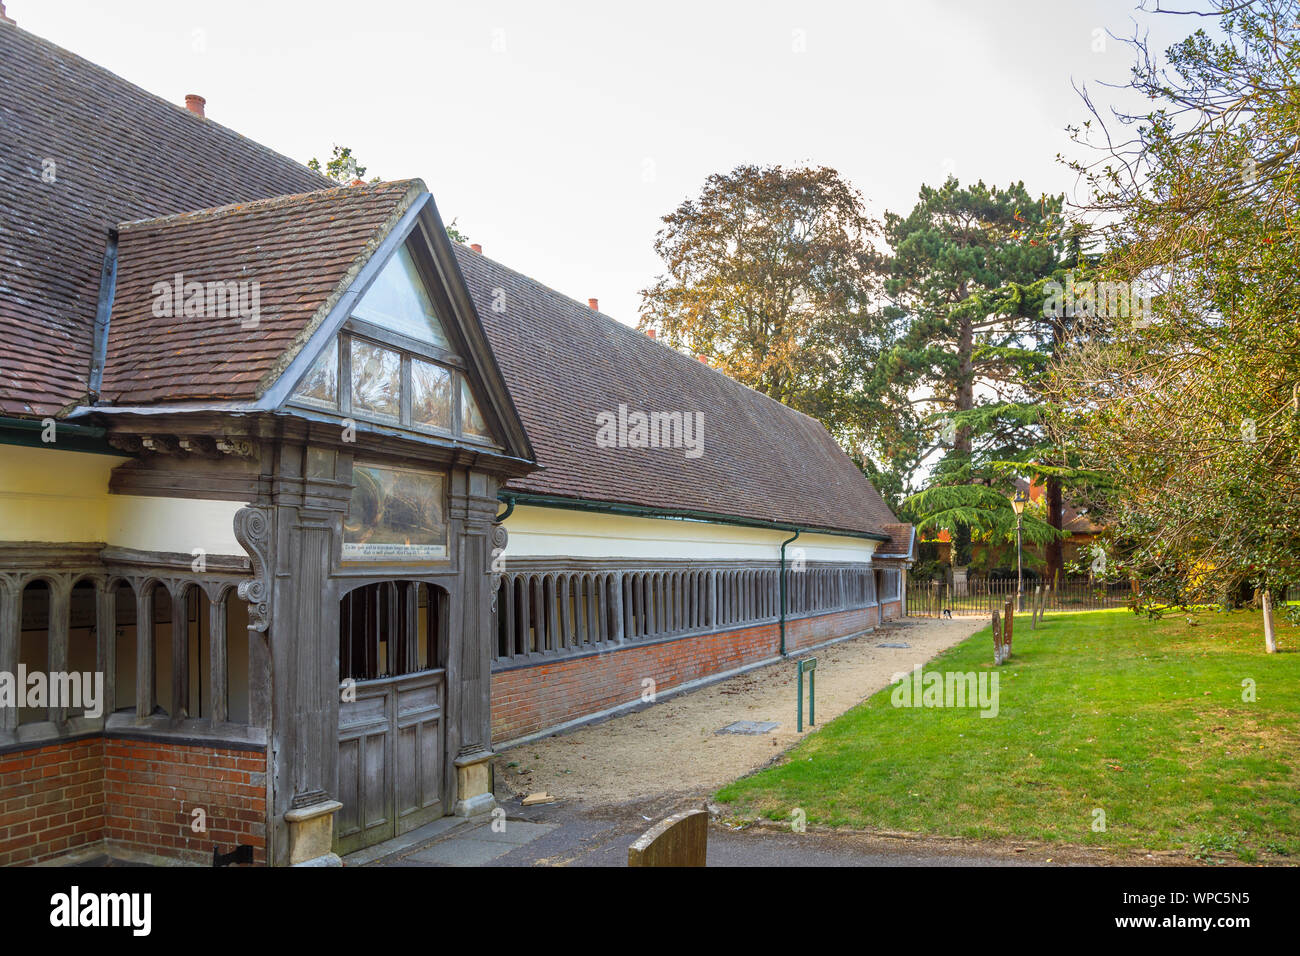 Gabled porch and cloister walk of historic 17th century Long Alley Almshouses, Abingdon-on-Thames, Oxfordshire, south-east England, UK Stock Photo